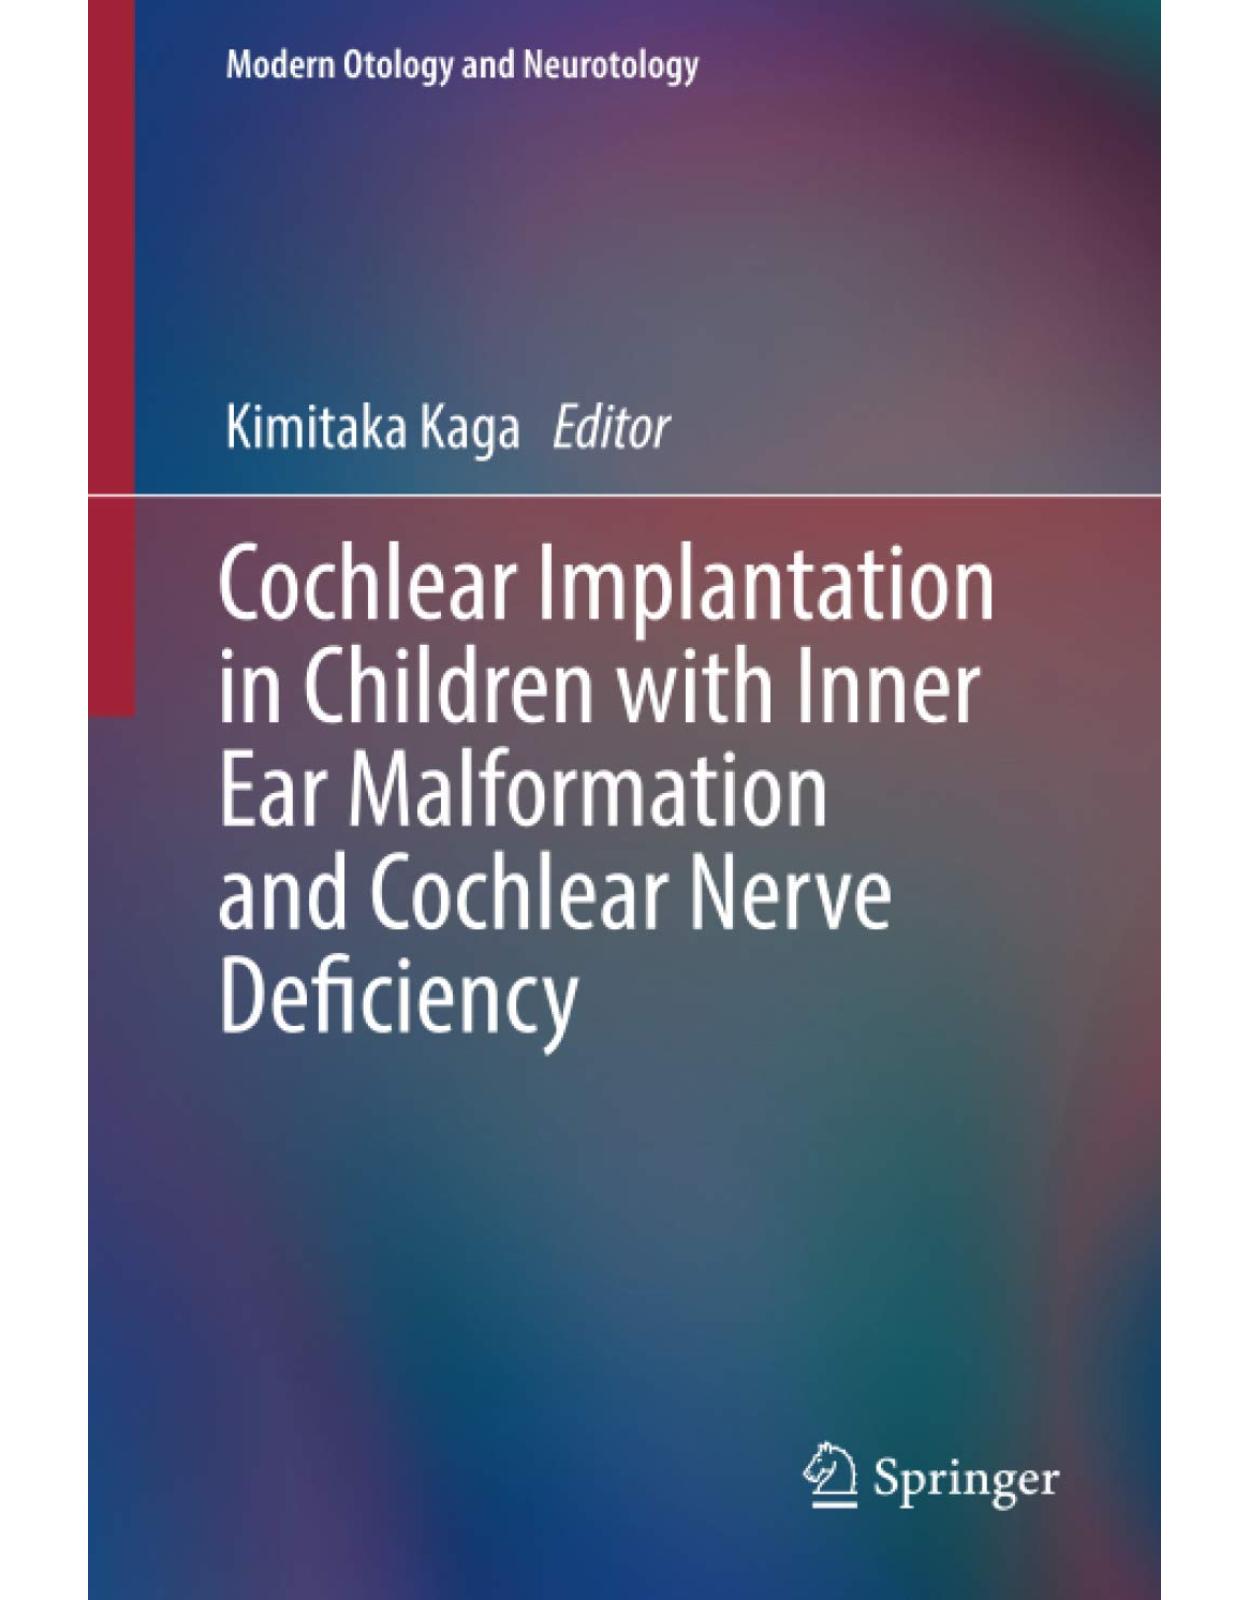 Cochlear Implantation in Children with Inner Ear Malformation and Cochlear Nerve Deficiency (Modern Otology and Neurotology)